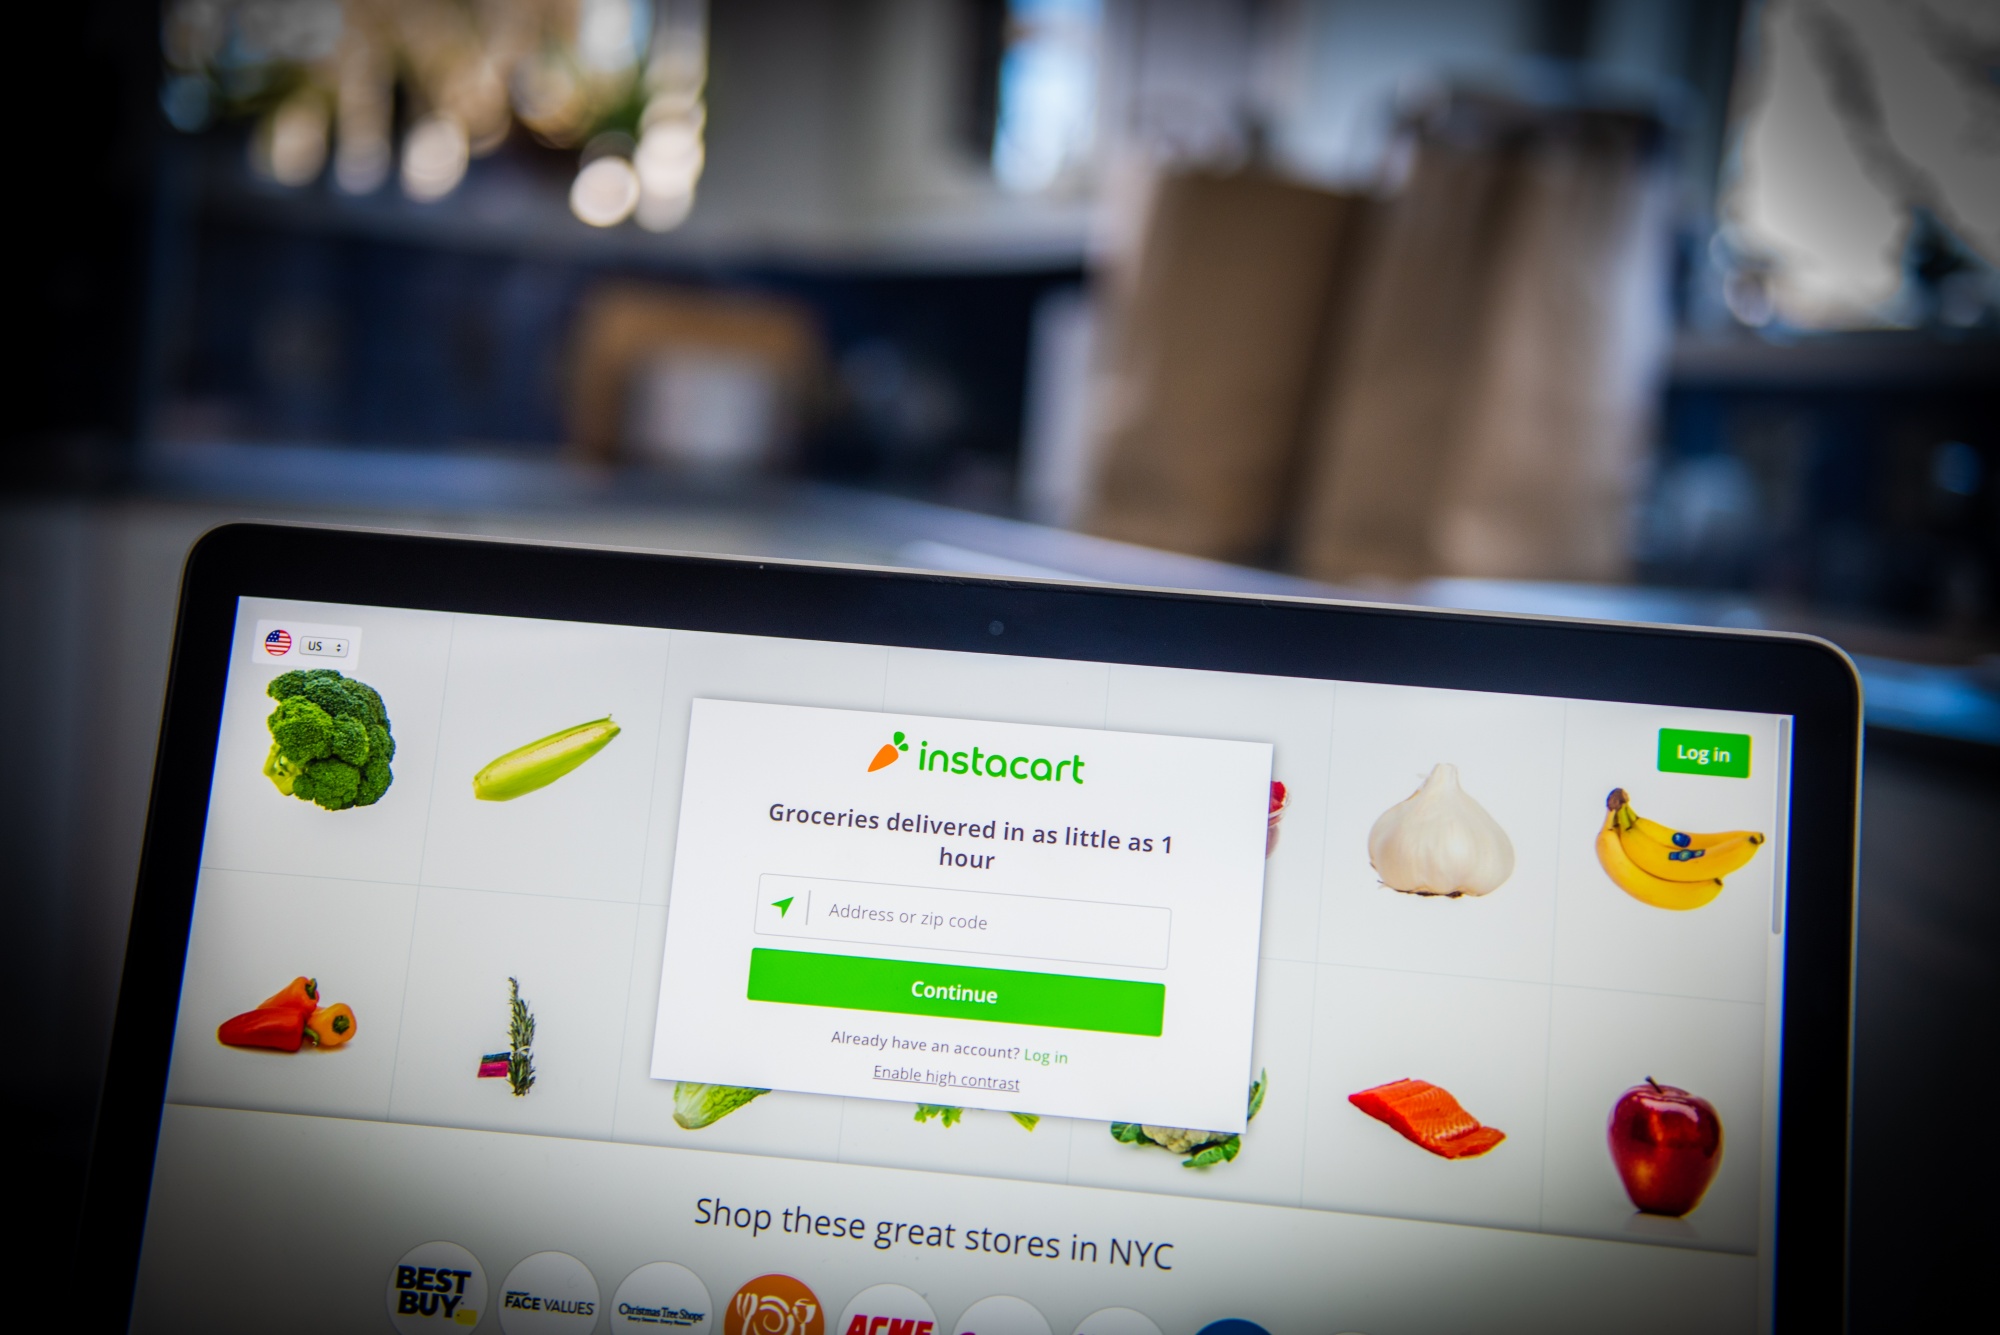 Study: Instacart lifts grocery store job creation, revenue